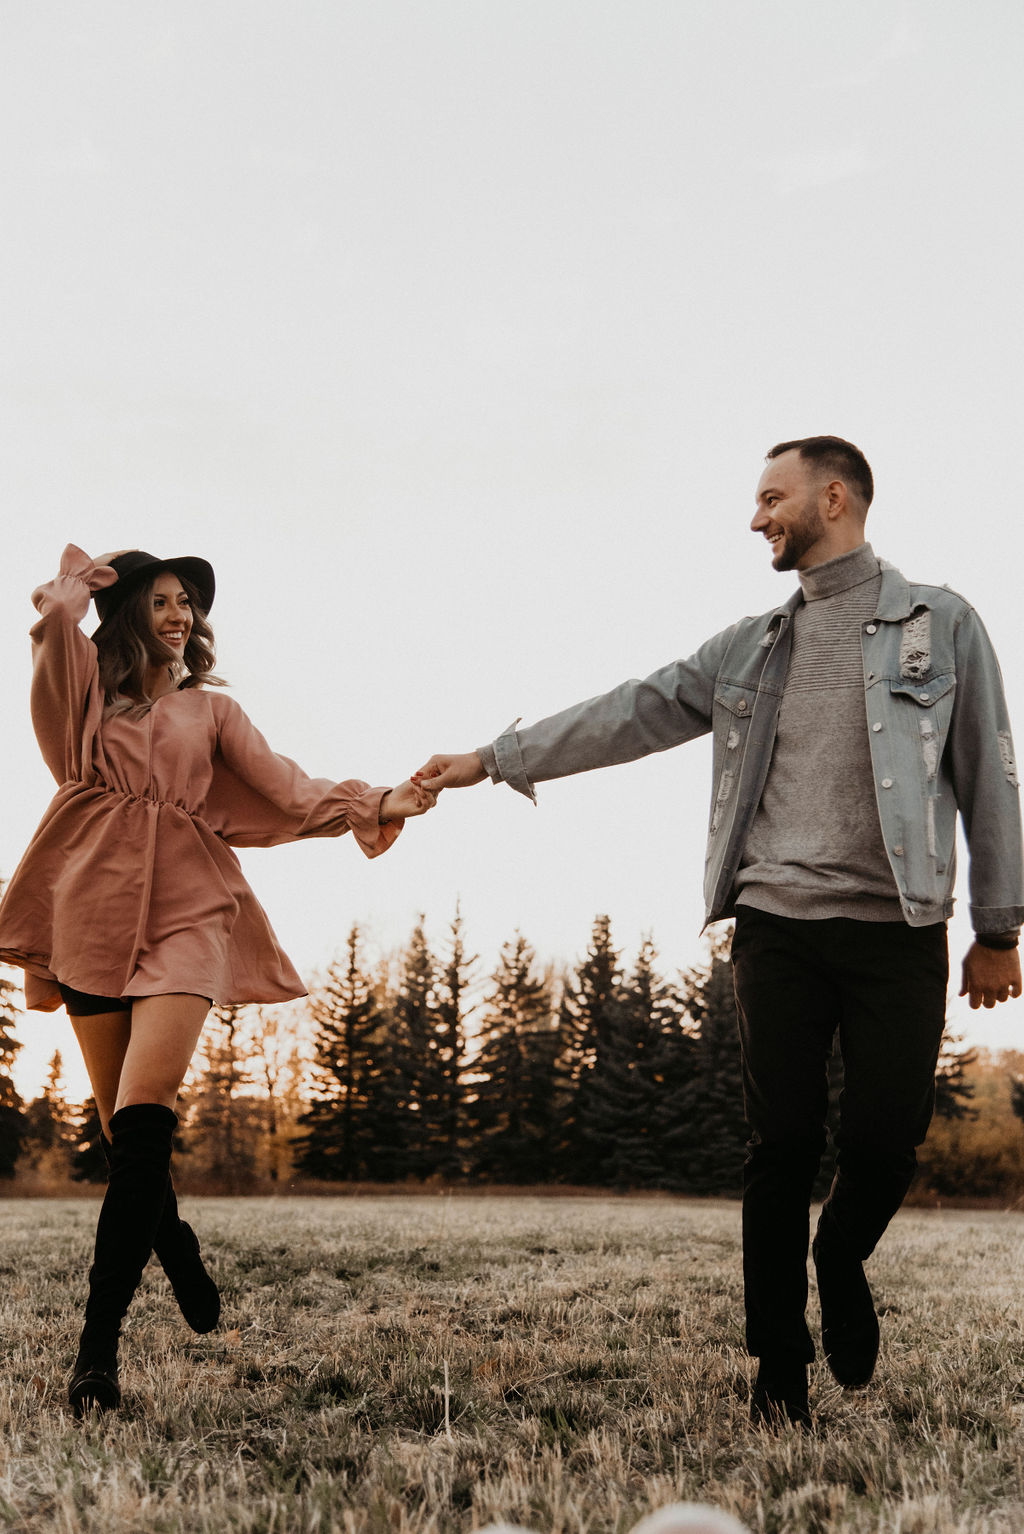 Engagement session outfit inspiration with blush dress and denim jacket